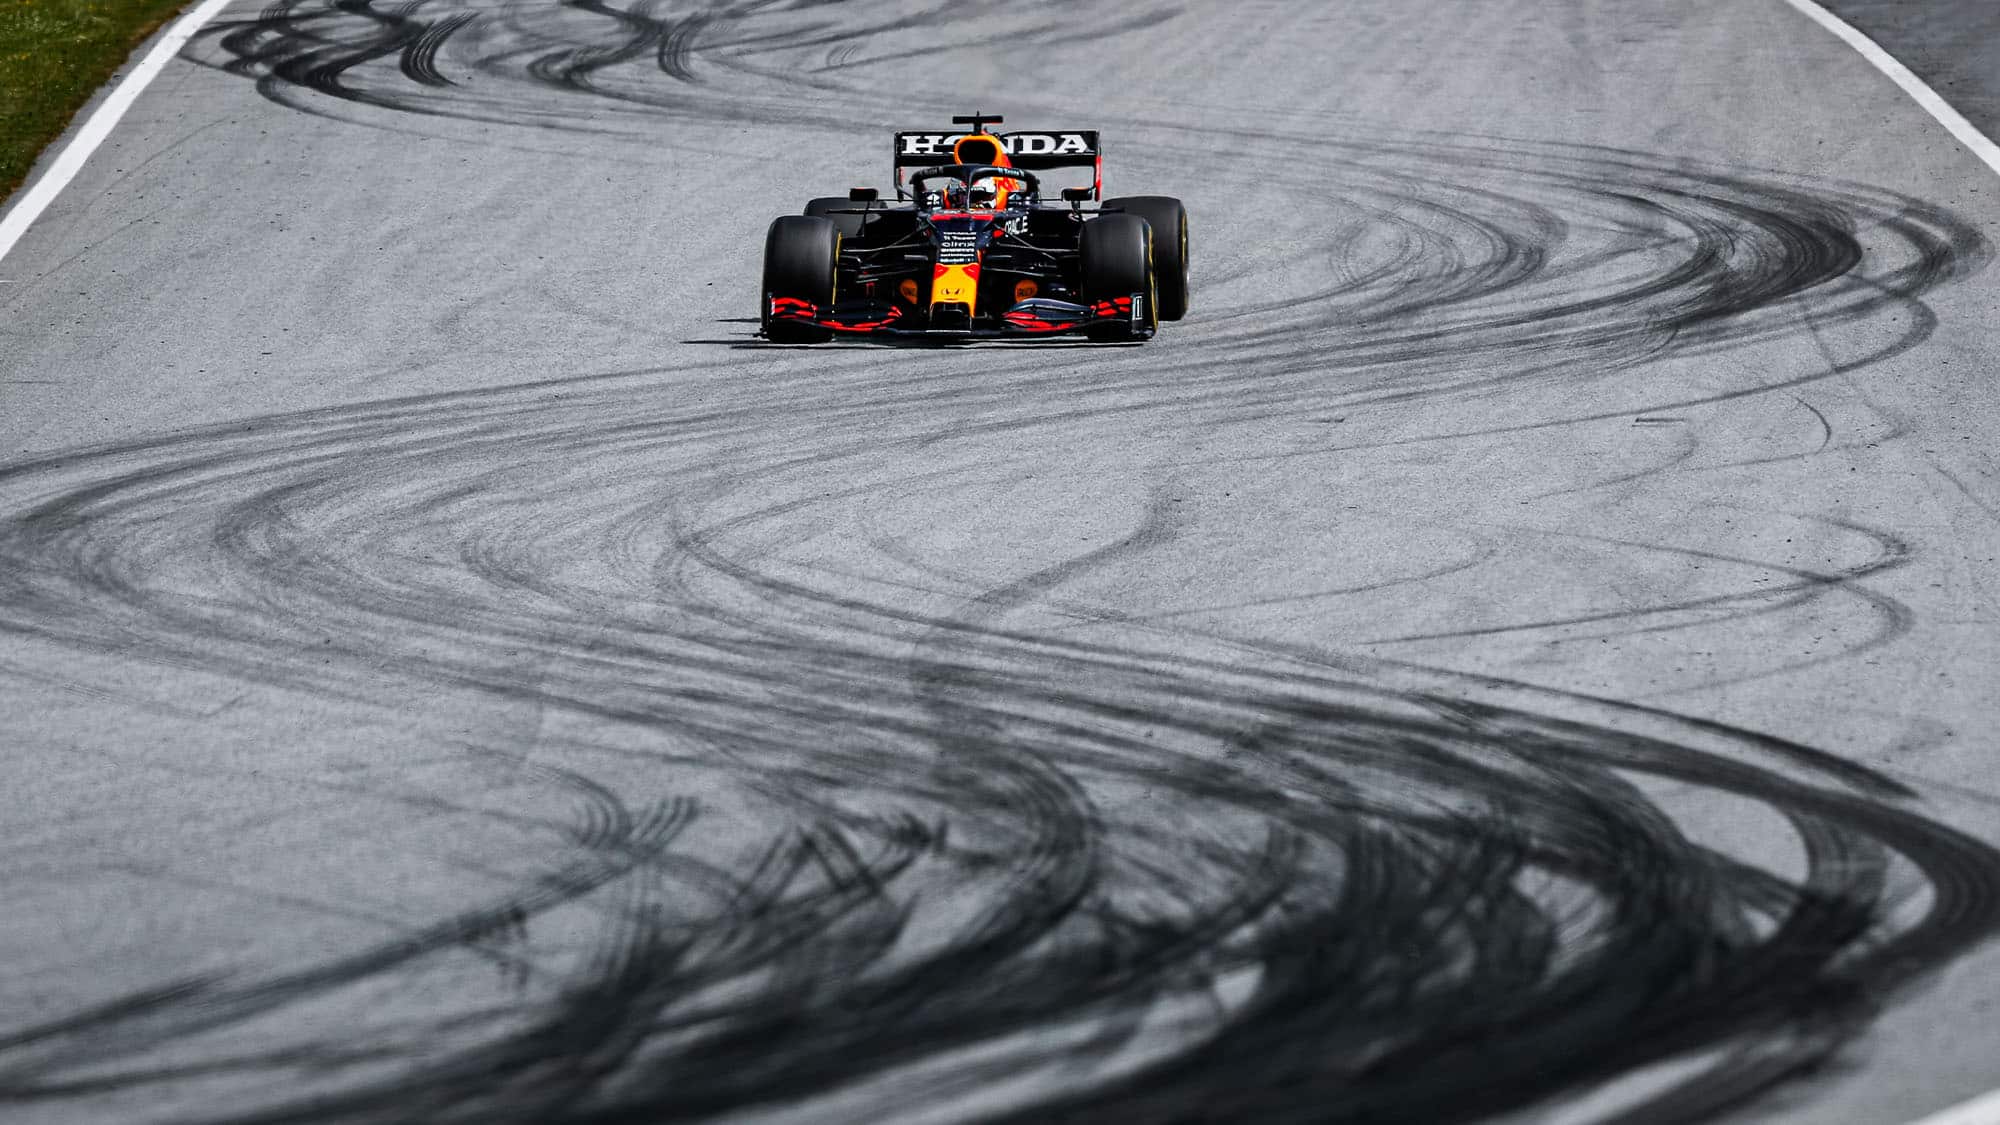 Max Verstappen drives over tyre marks at the 2021 Styrian Grand Prix